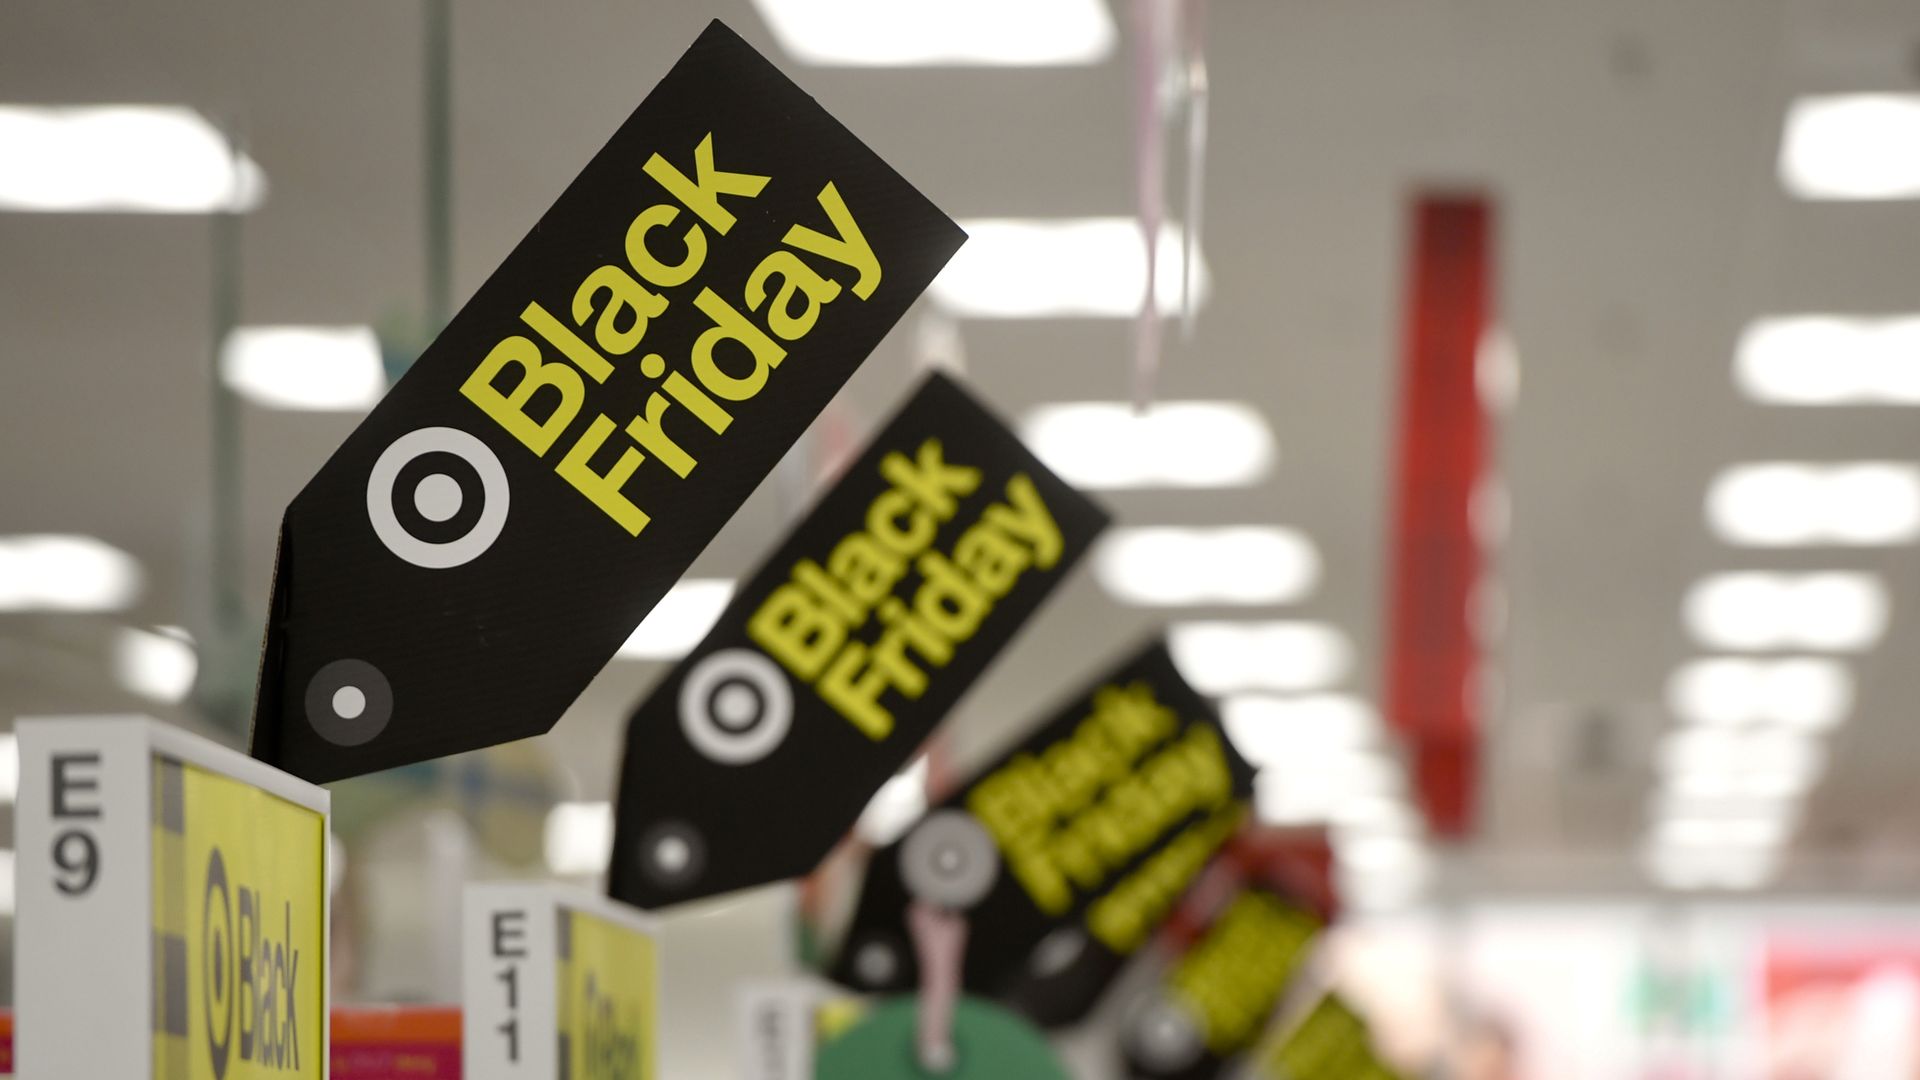 Black Friday sale signs with Target logo